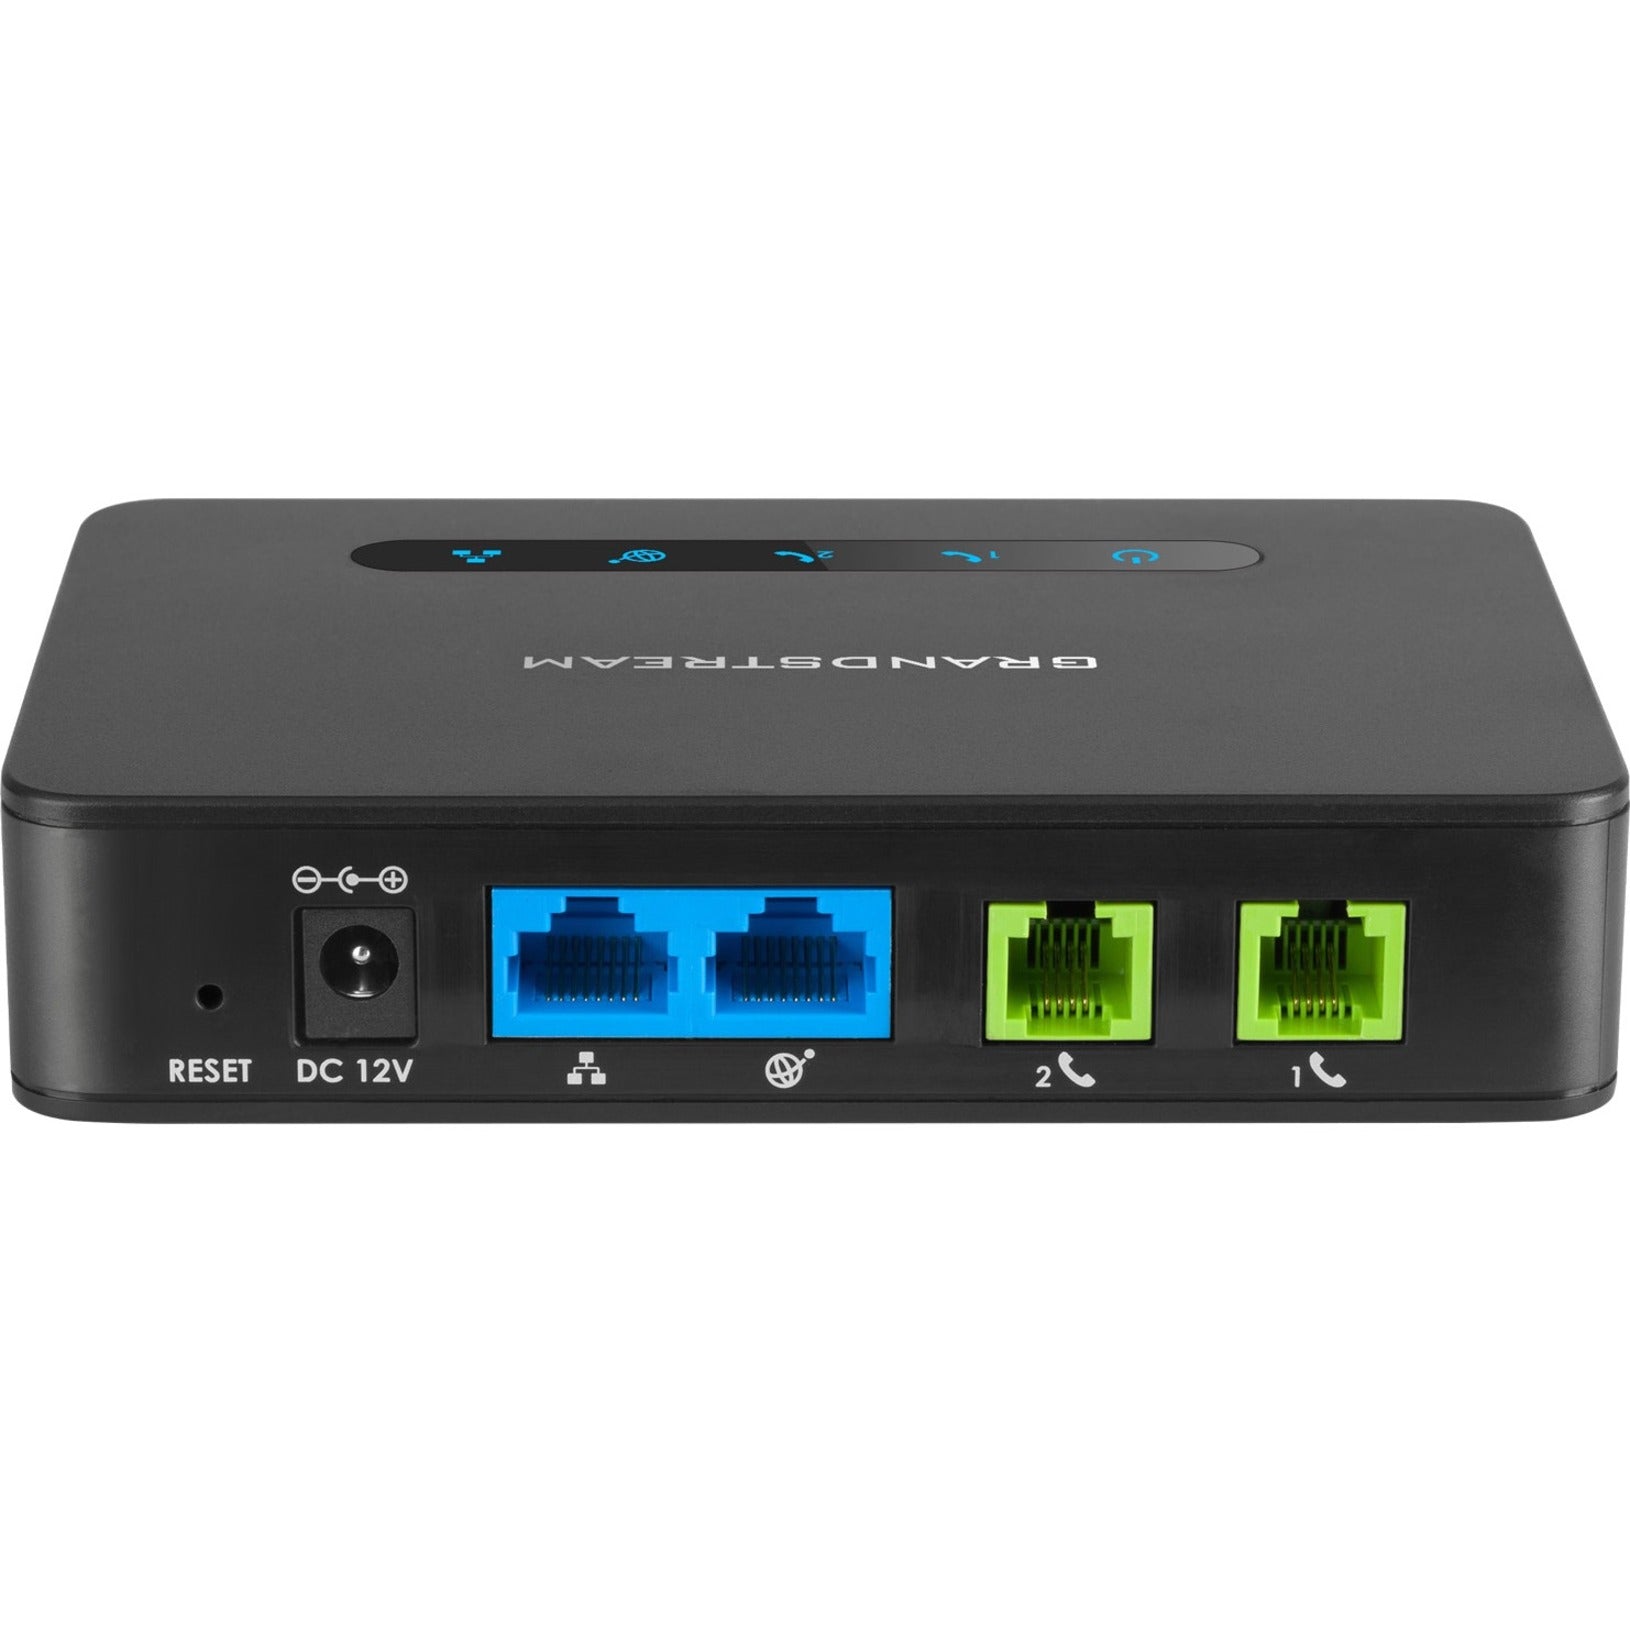 Grandstream HT812 Powerful 2-Port ATA with Gigabit NAT Router, VoIP Gateway